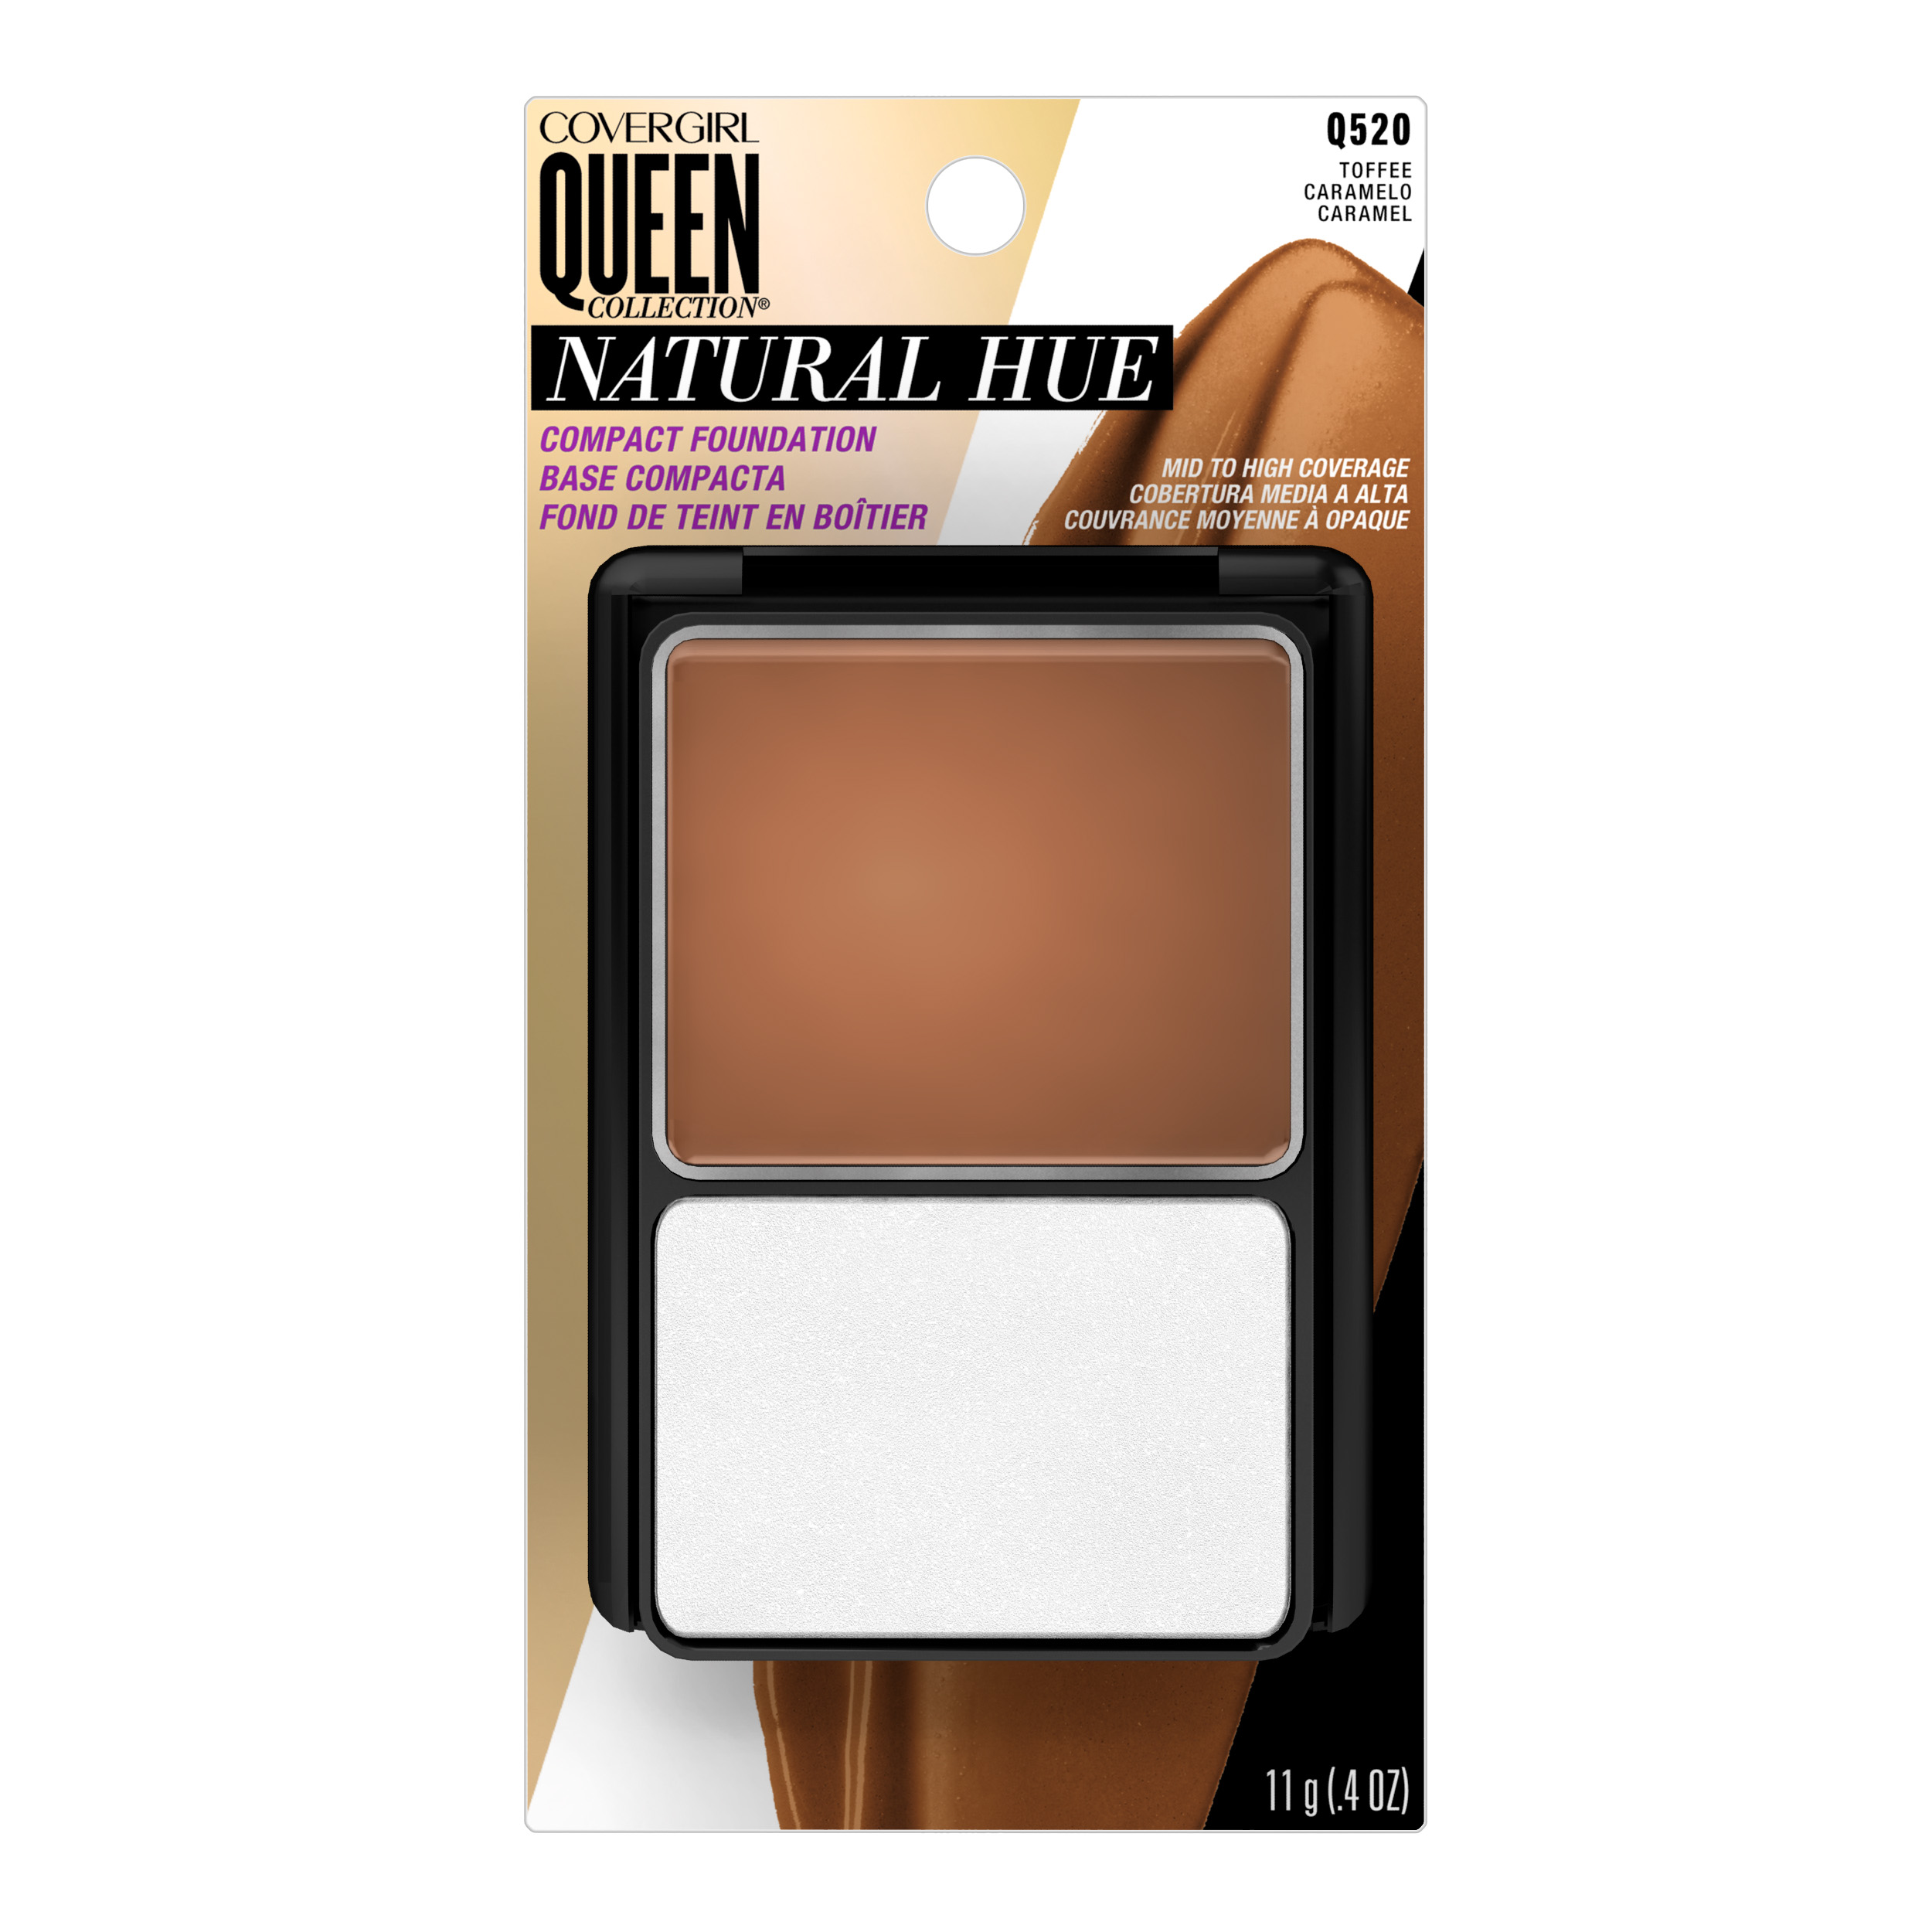 COVERGIRL Queen Natural Hue Compact Foundation, Toffee - image 3 of 4